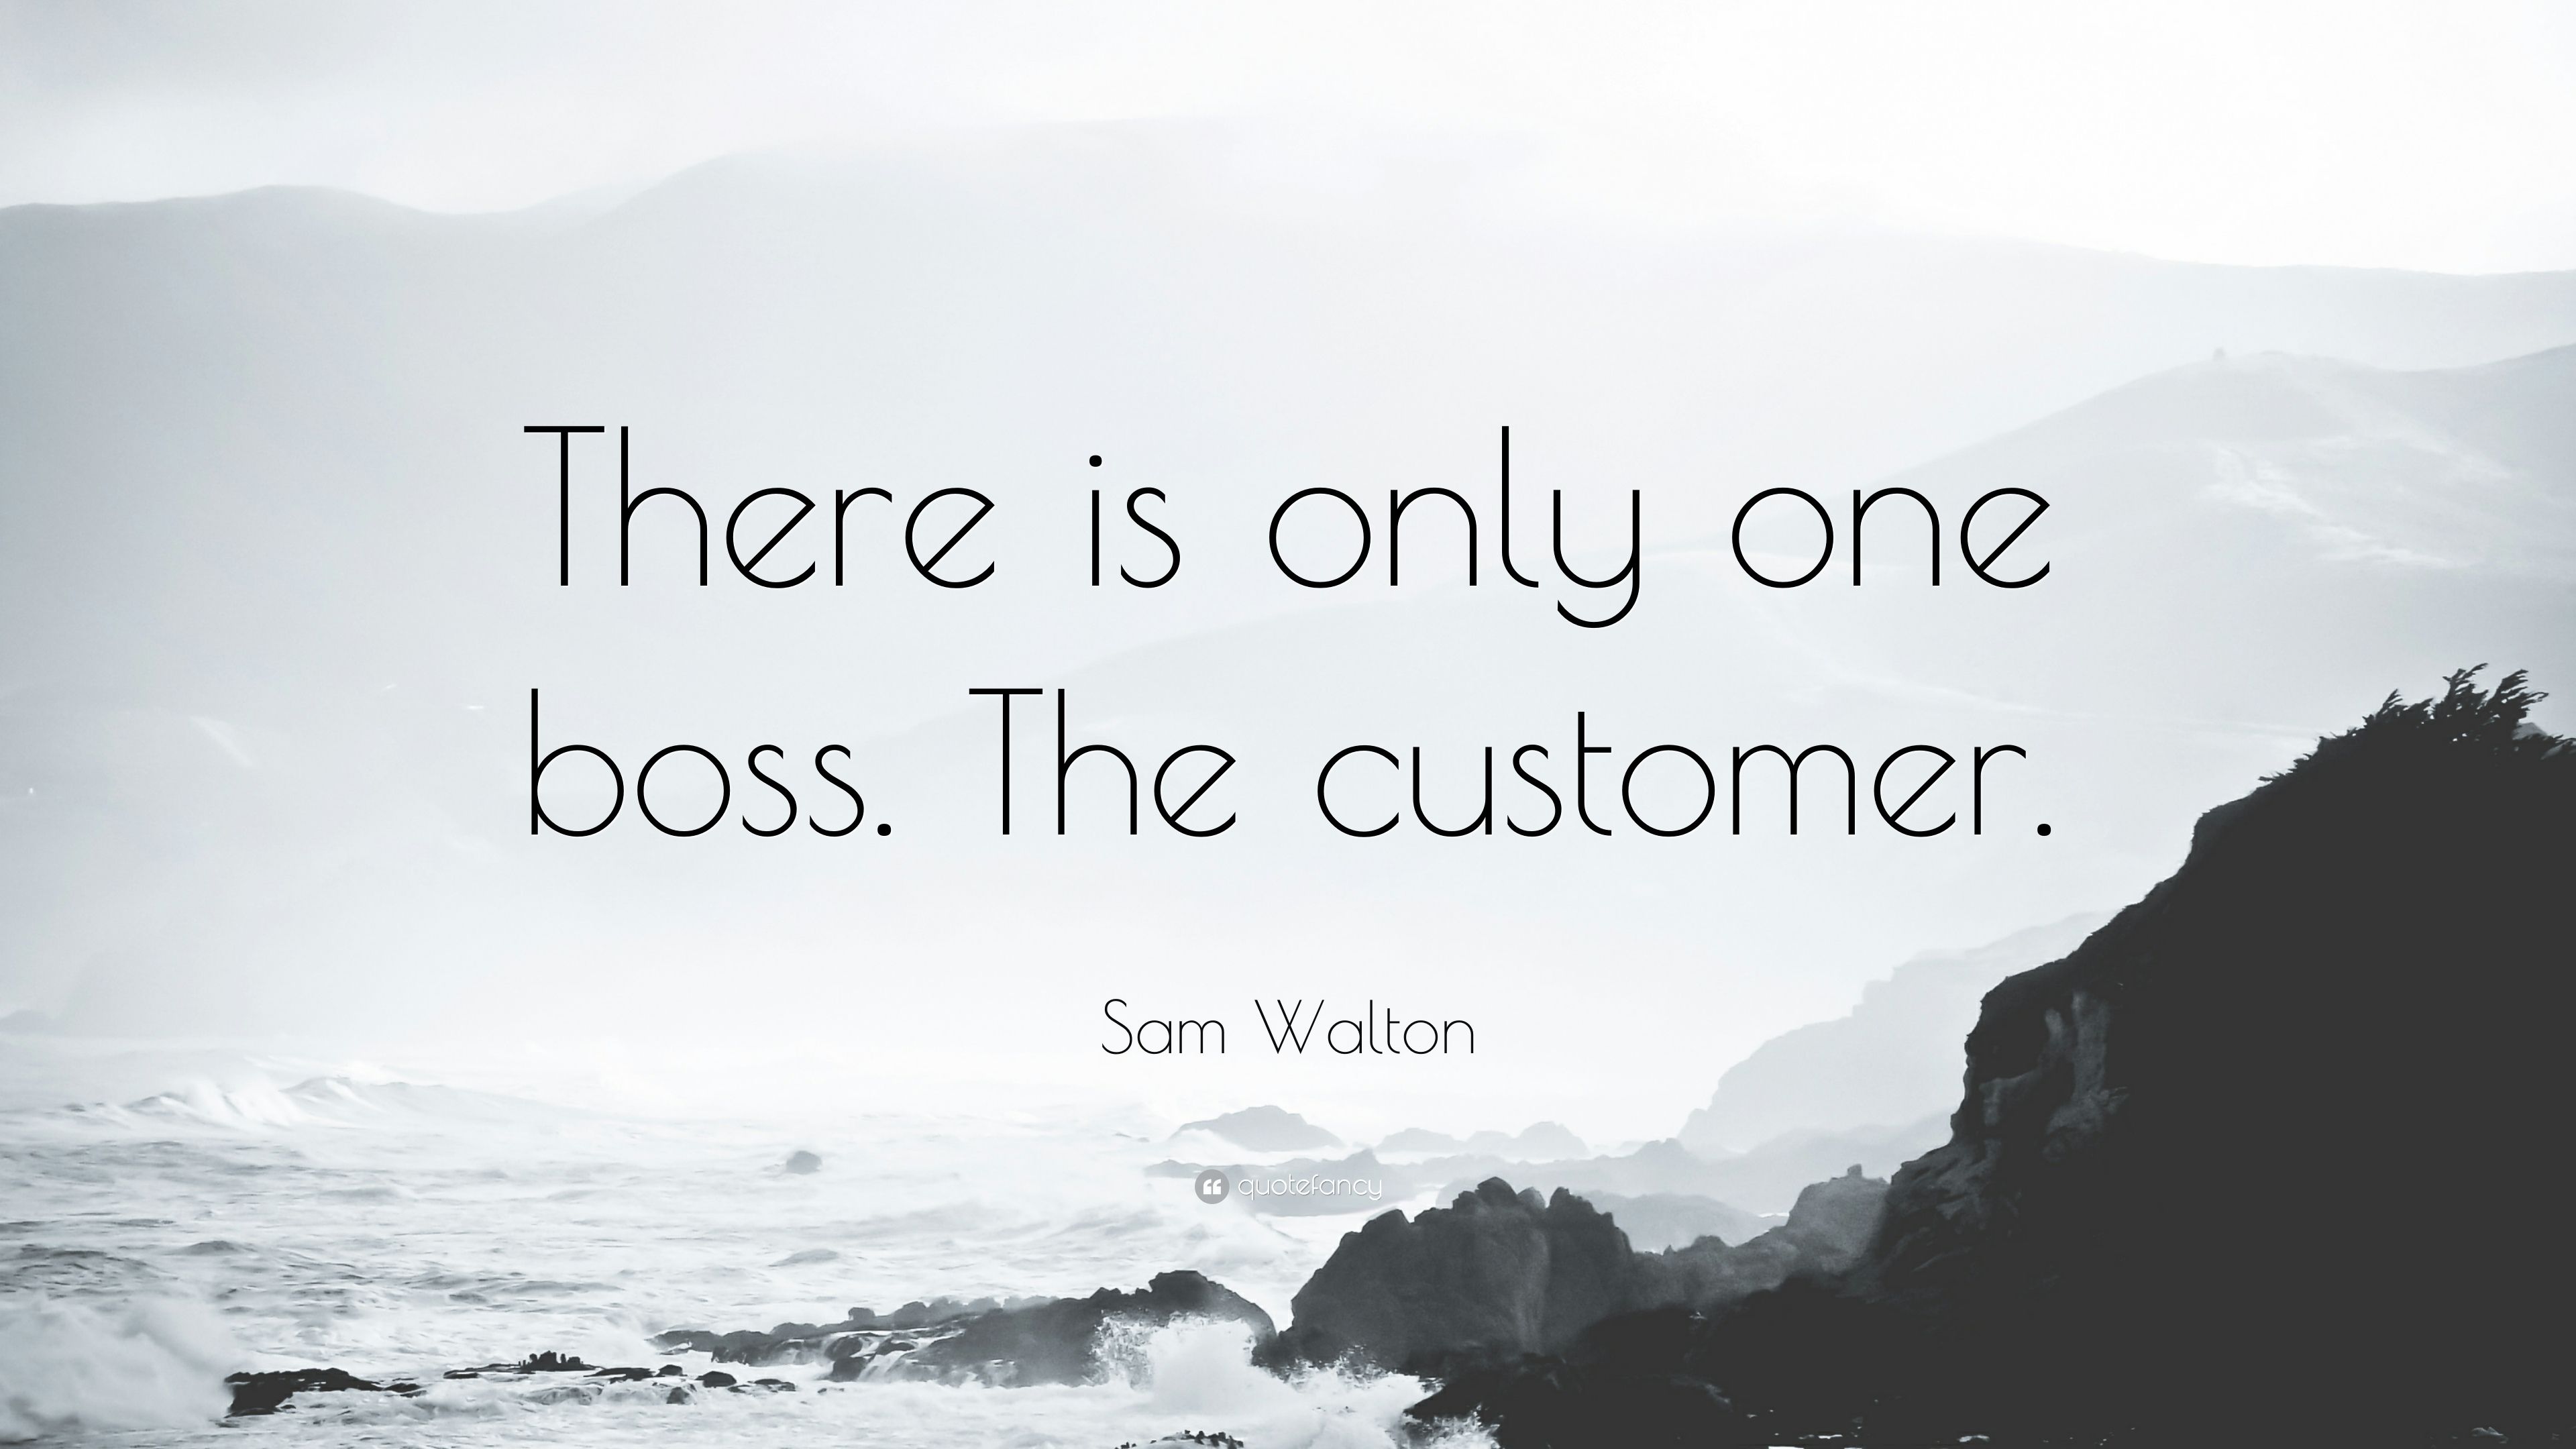 Sam Walton Quote: “There is only one boss. The customer.” 22